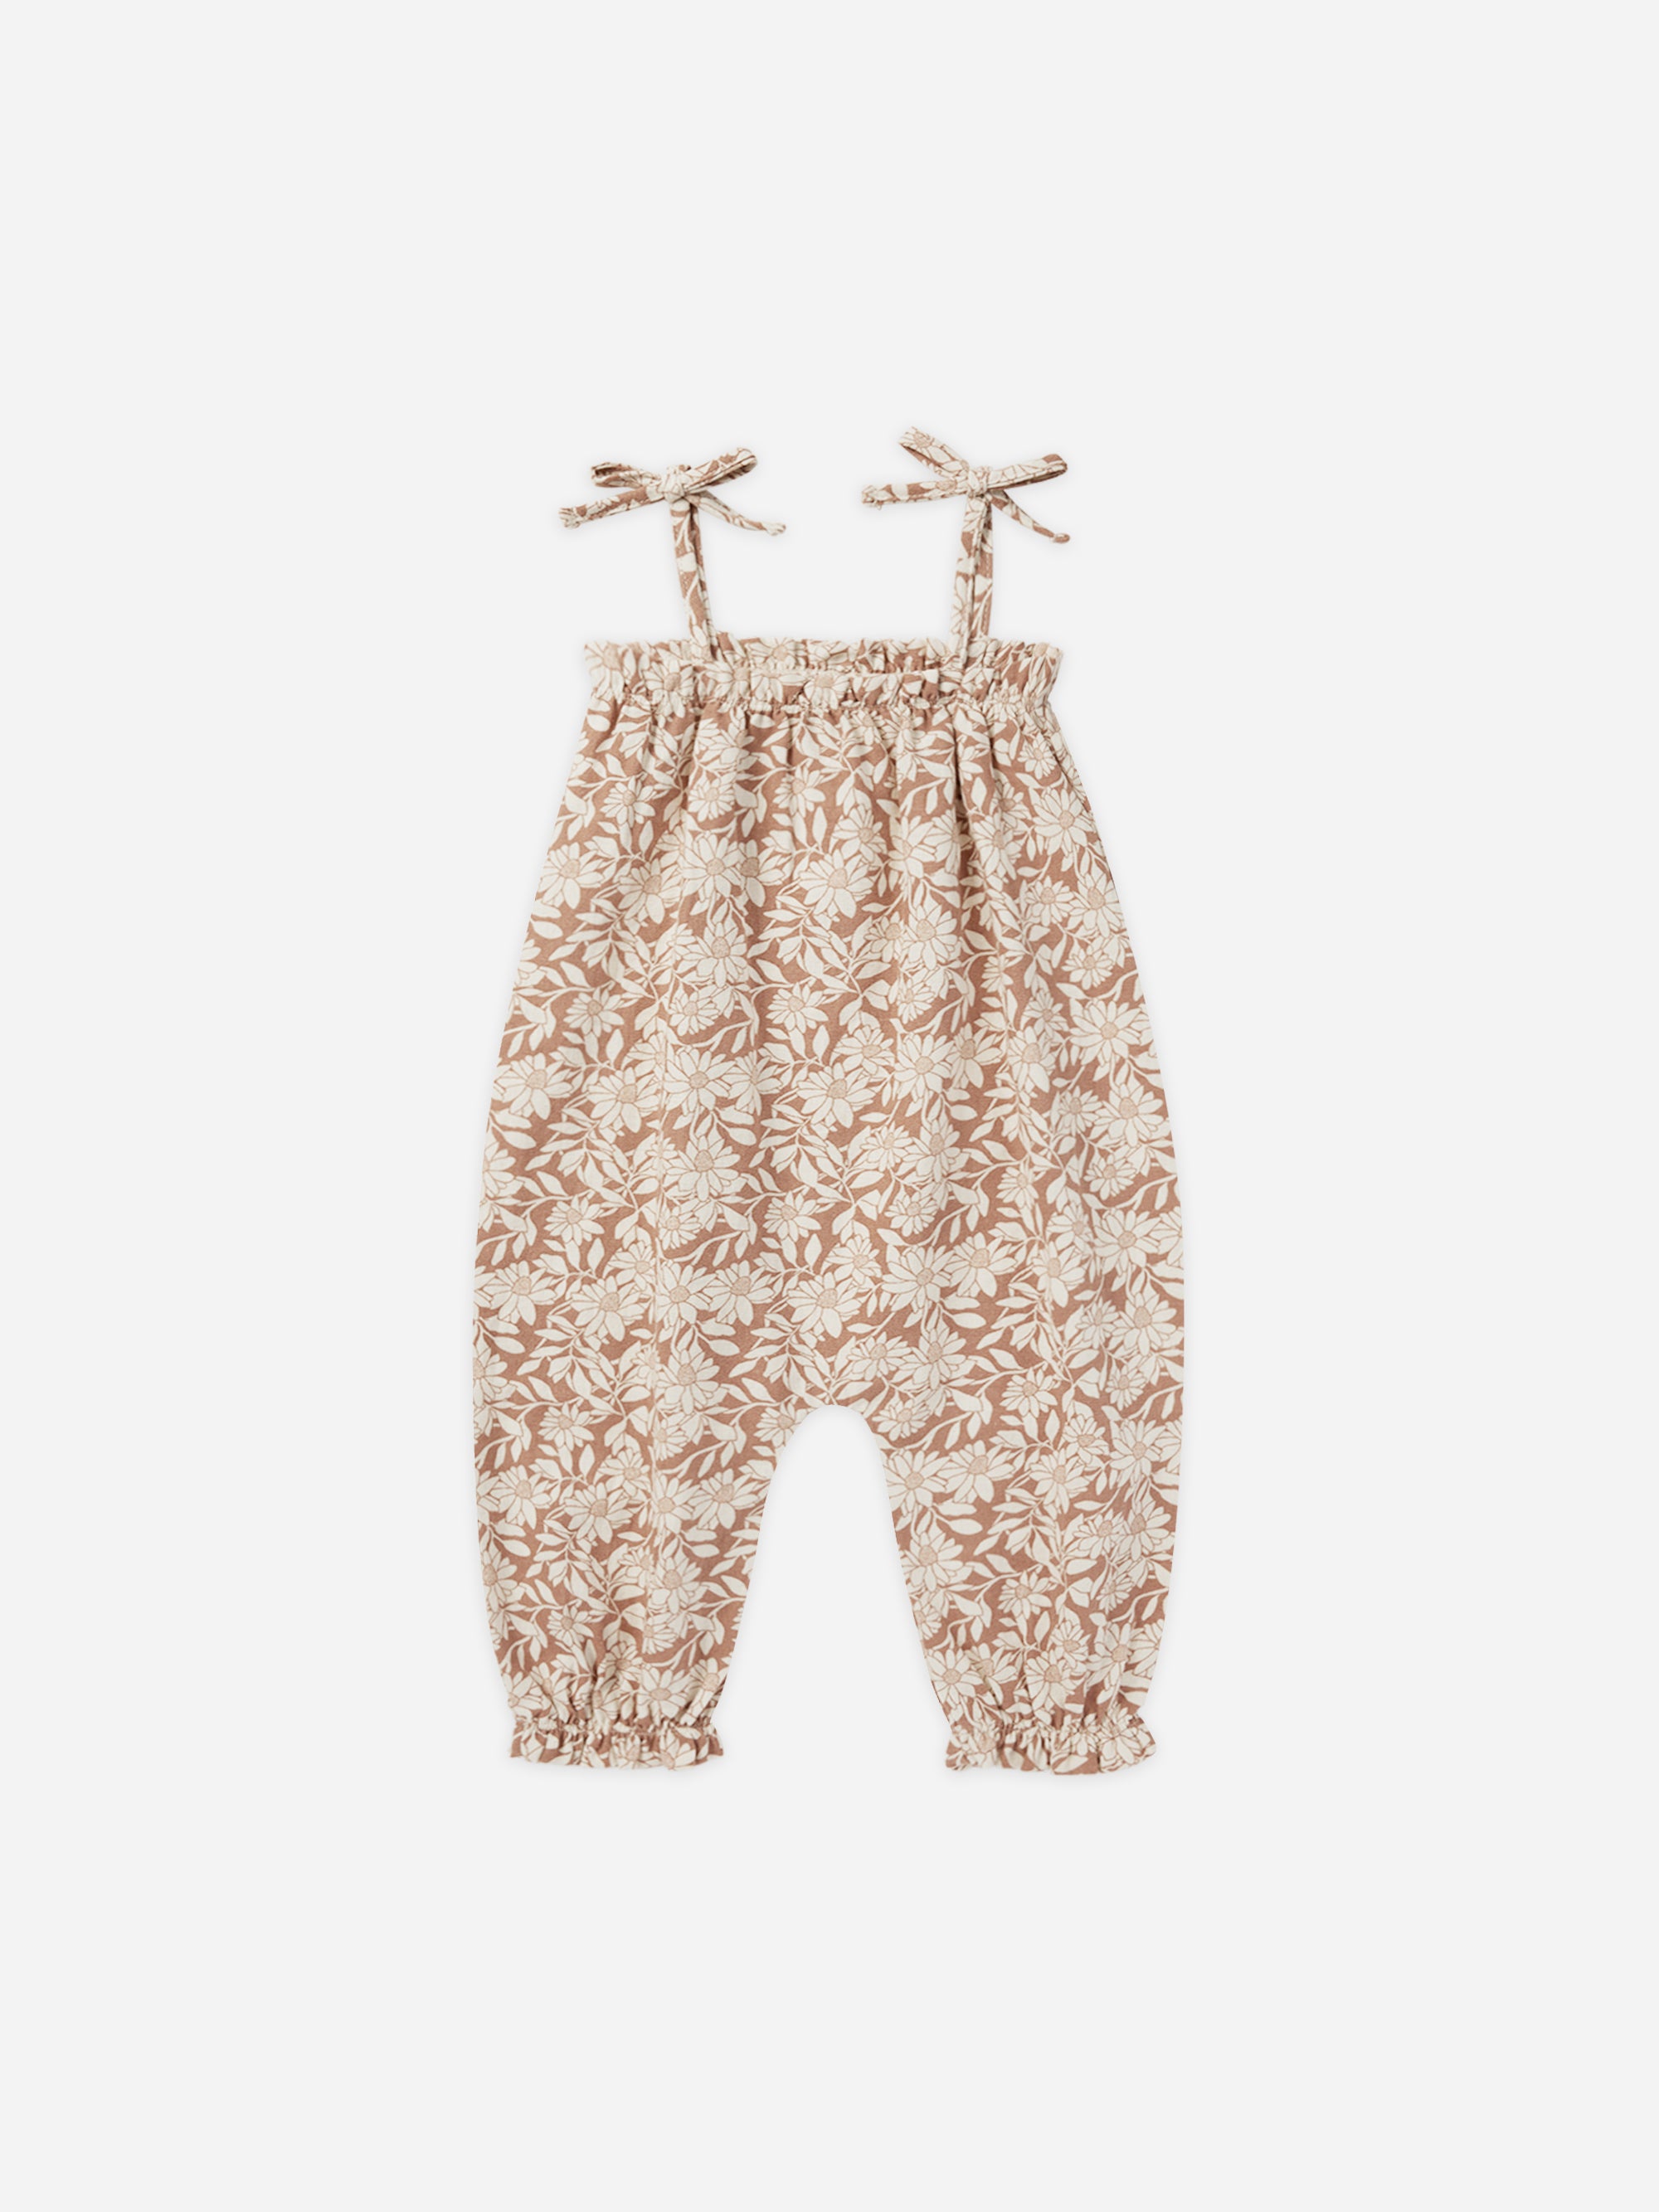 Bubble Jumpsuit || Plumeria - Rylee + Cru | Kids Clothes | Trendy Baby Clothes | Modern Infant Outfits |